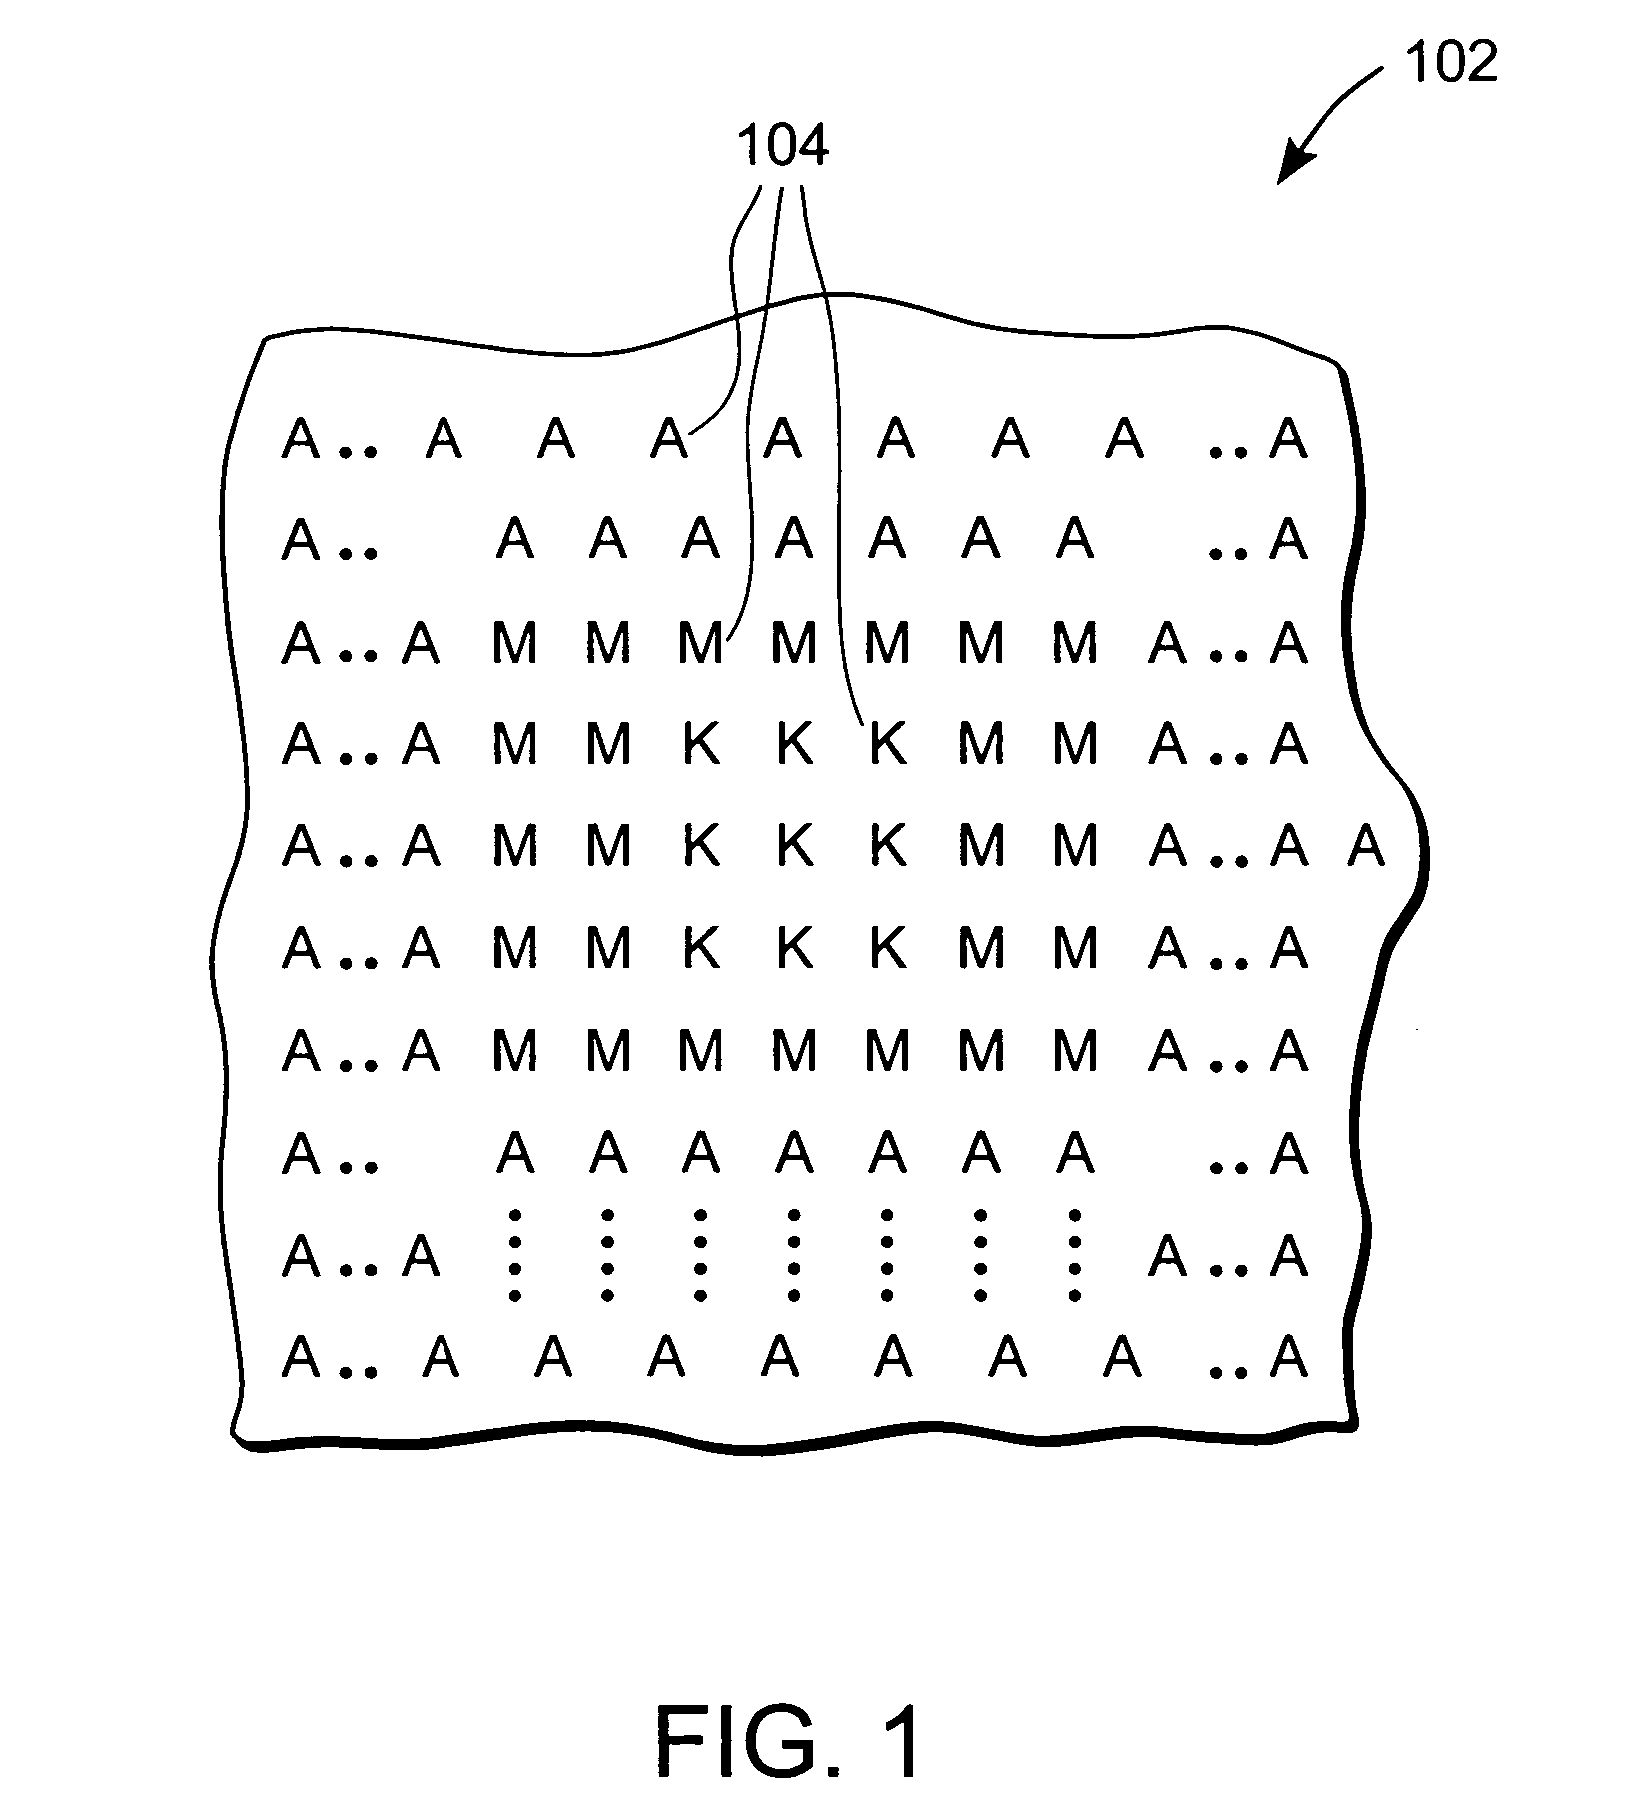 Non-uniform power semiconductor and method for making non-uniform power semiconductor